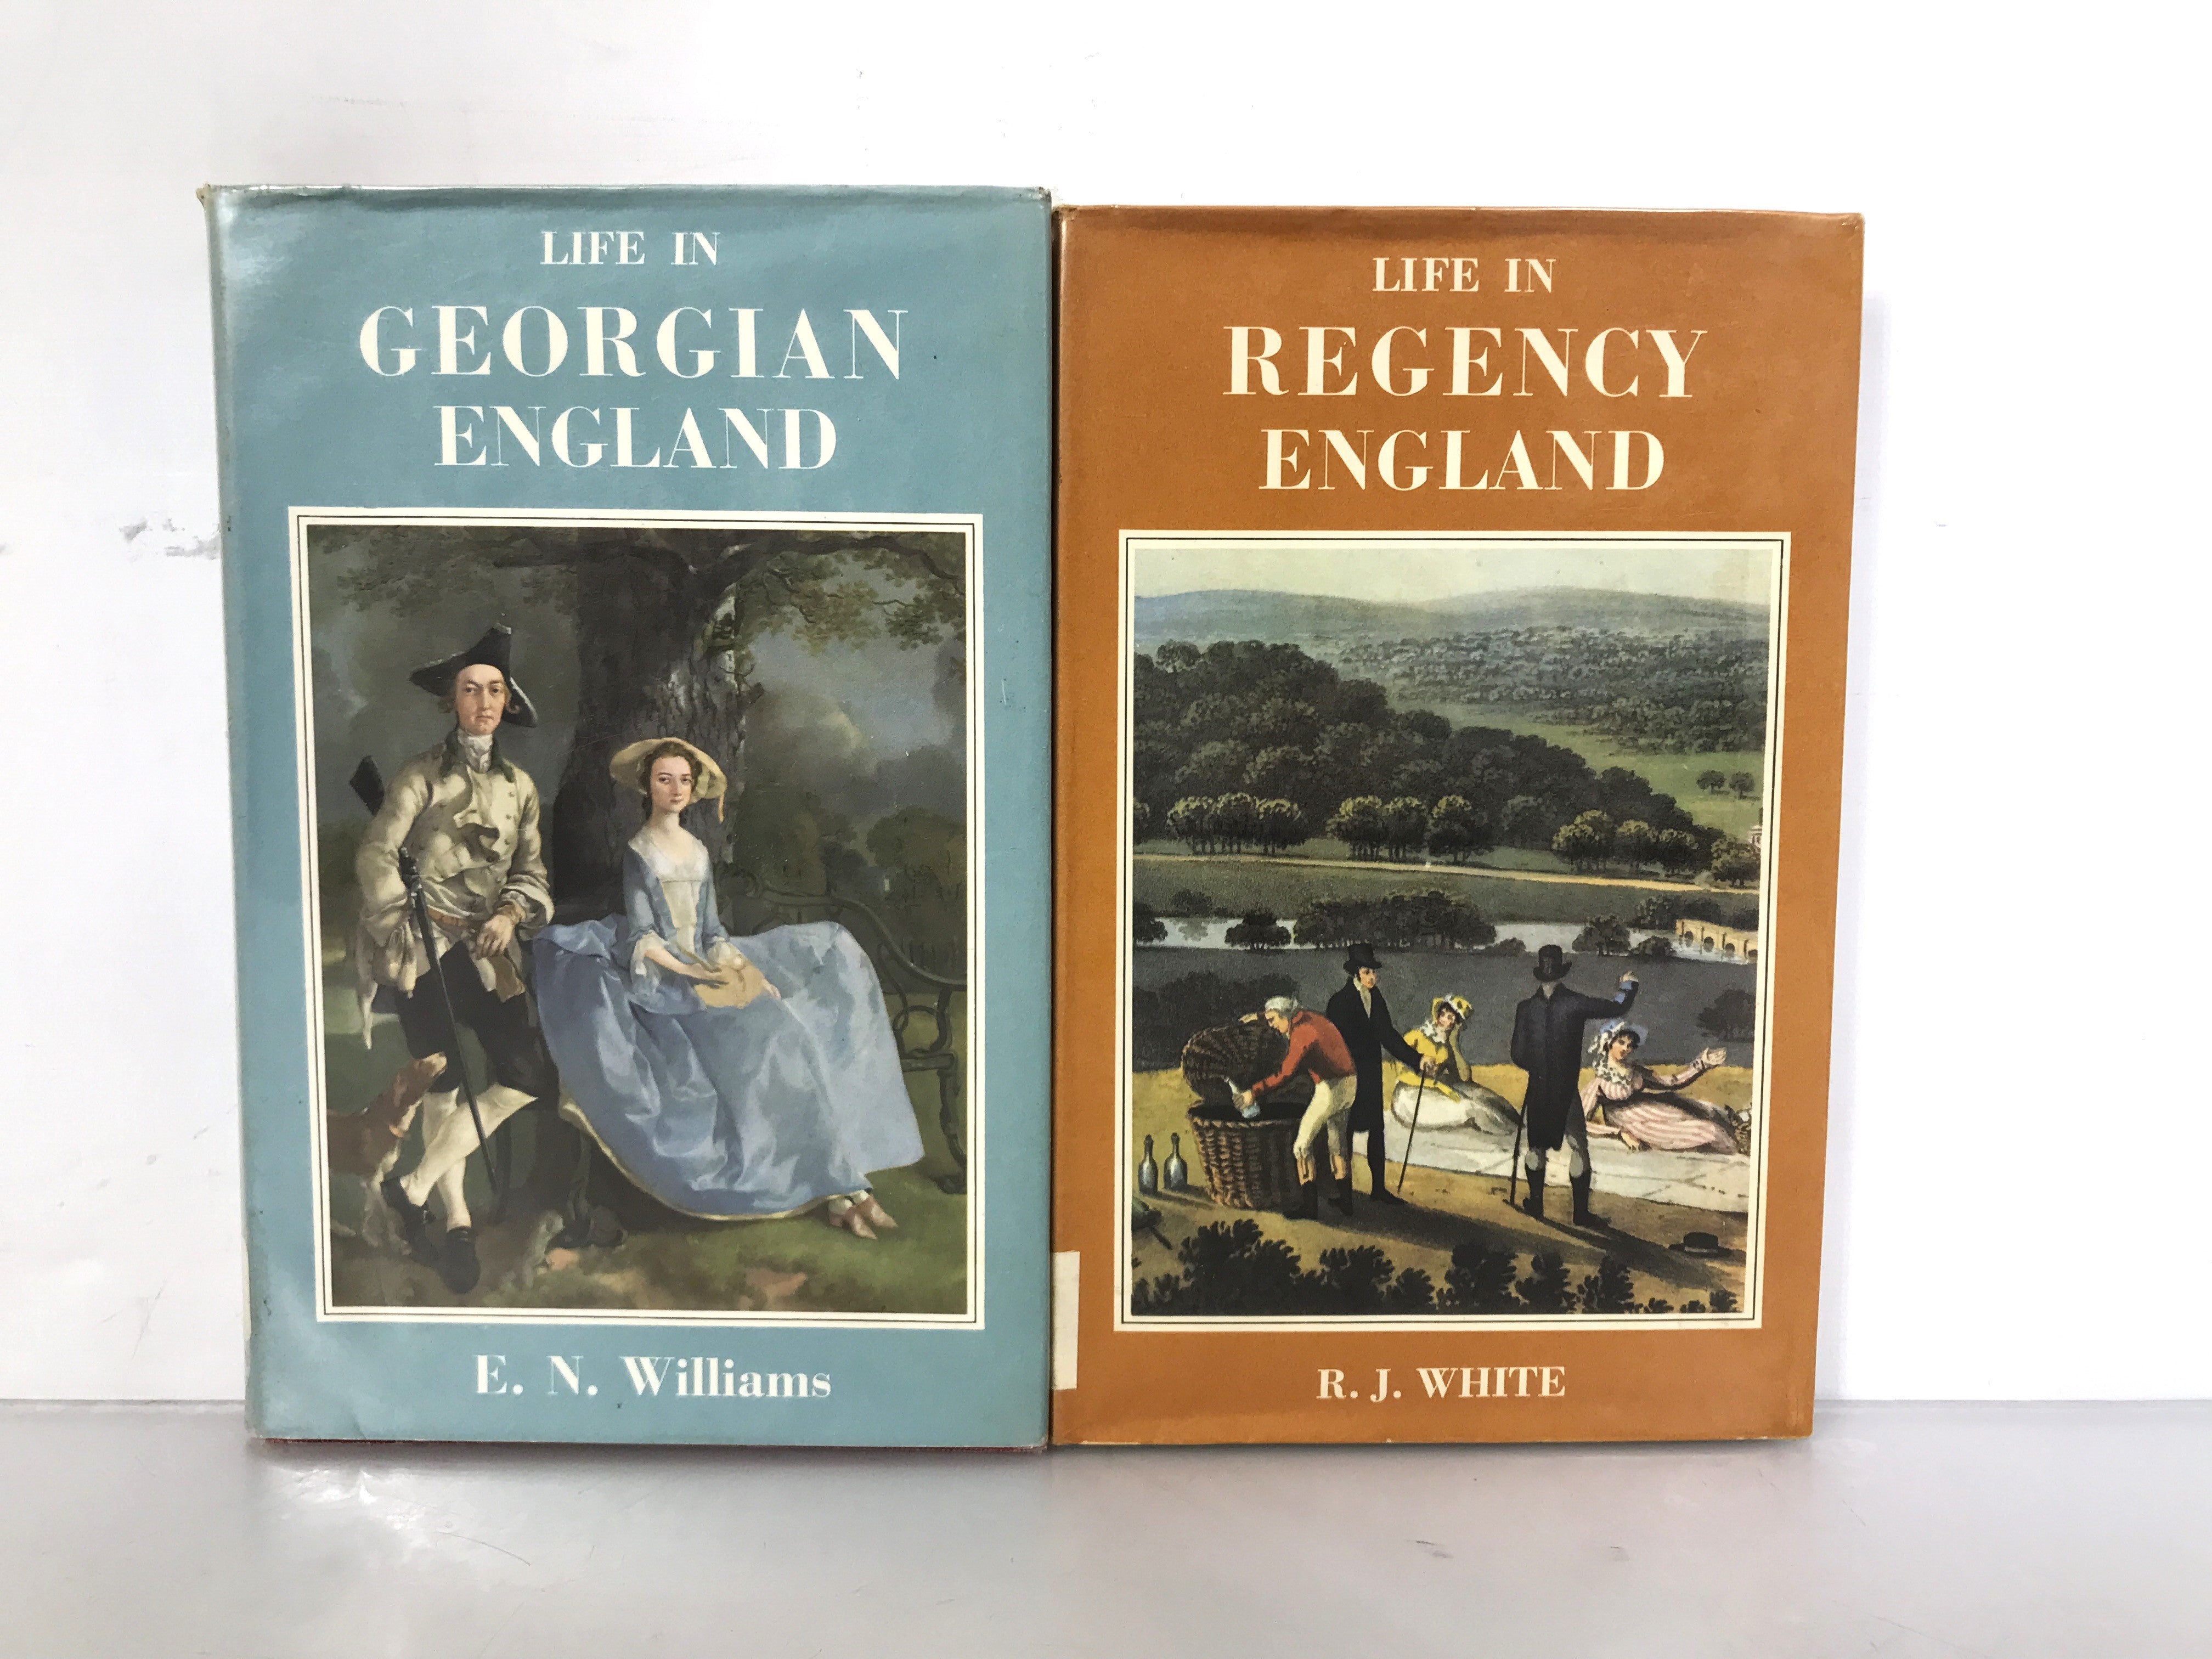 Lot of 2 Vintage English Life Series Books by E.N. Williams and R.J. White 1962, 1965 HC DJ